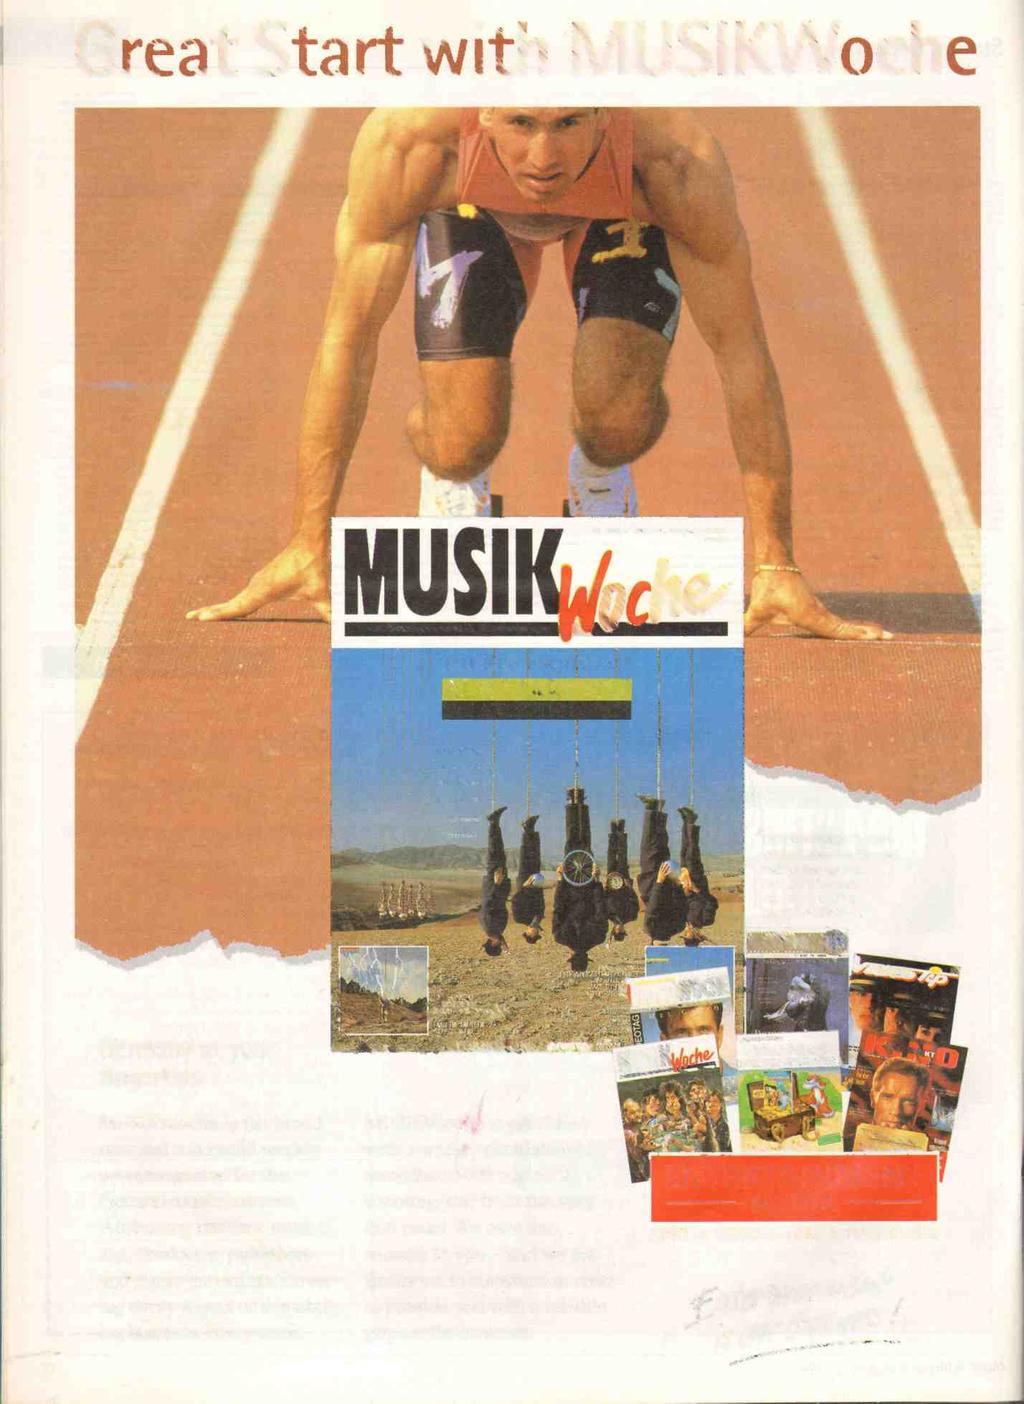 Great Start with MUSIKWoche la. Oktober 1993-I. Jahrgang - DM 6,- 7 C TH F. NEW ROJECT OF ENTERTAINMENT MEDIA VERLAG GmbH a co.